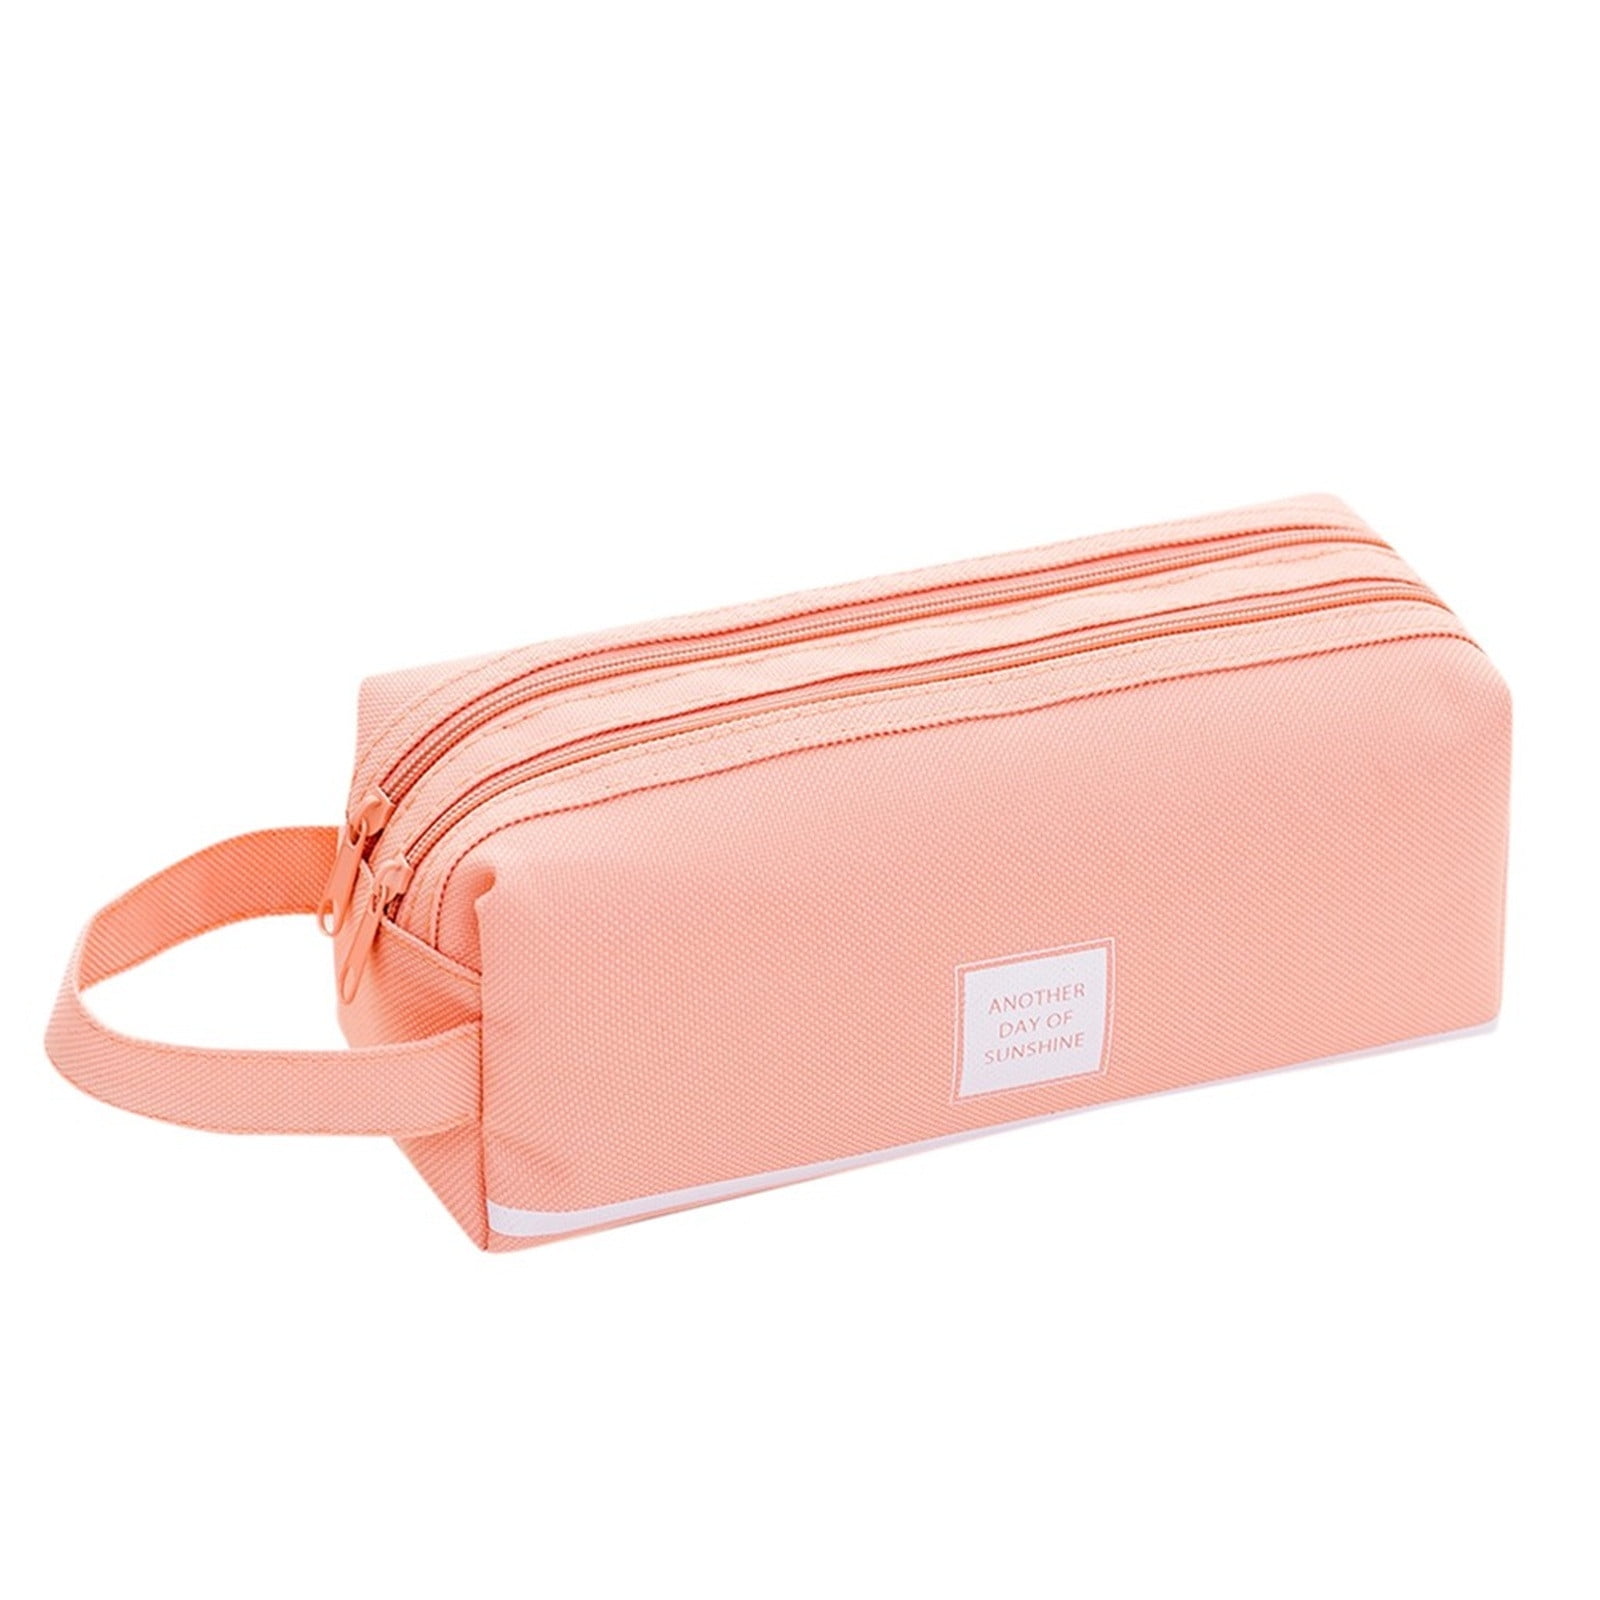 New Large Capacity Creative Handle Double Pencil Case Simp Stationery Bag 